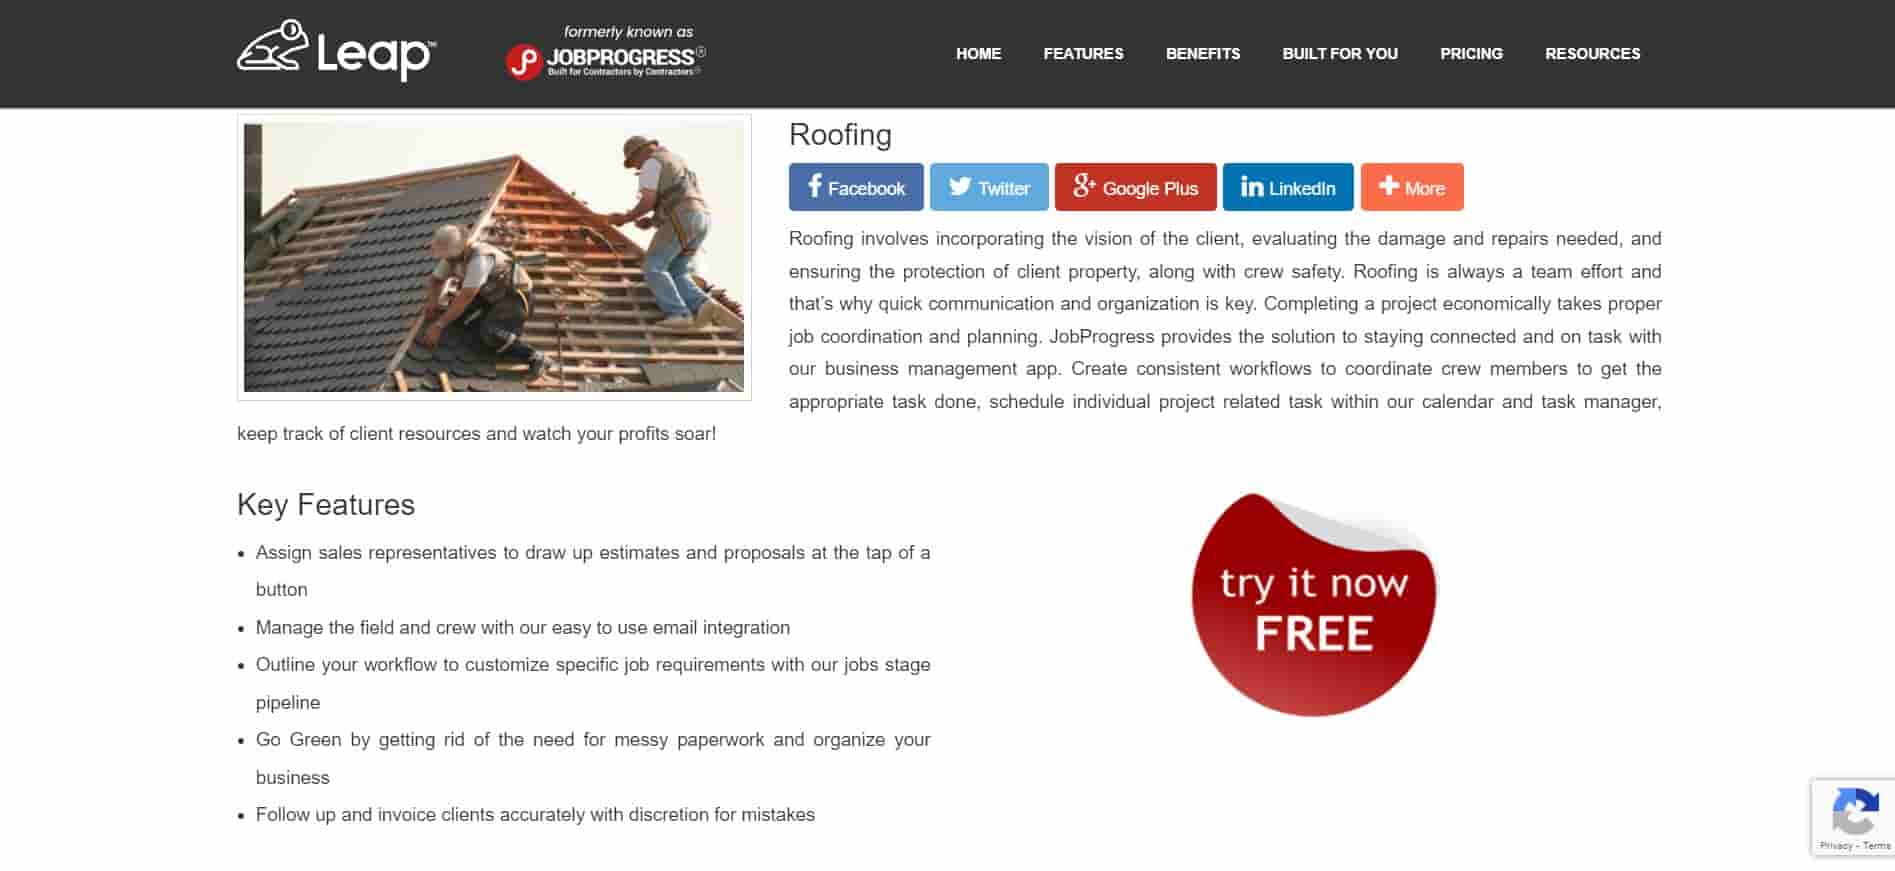 Leap site page showing laborers working on the roof